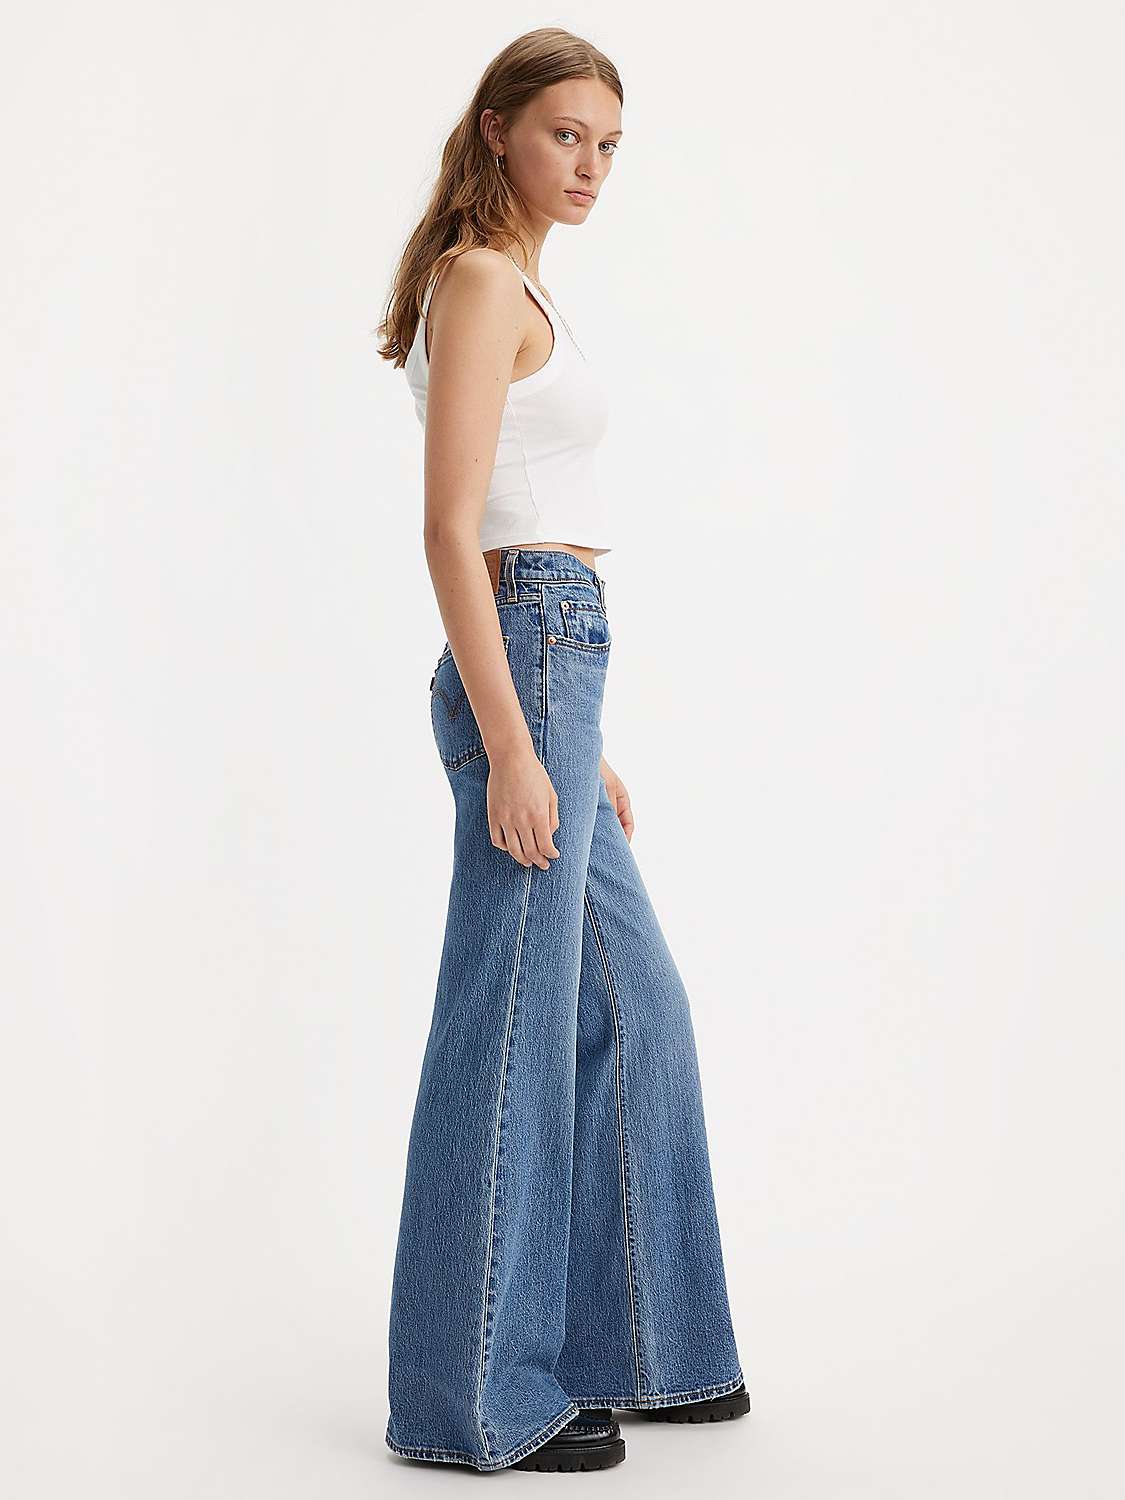 Buy Levi's Ribcage Bell Flared Leg Jeans Online at johnlewis.com